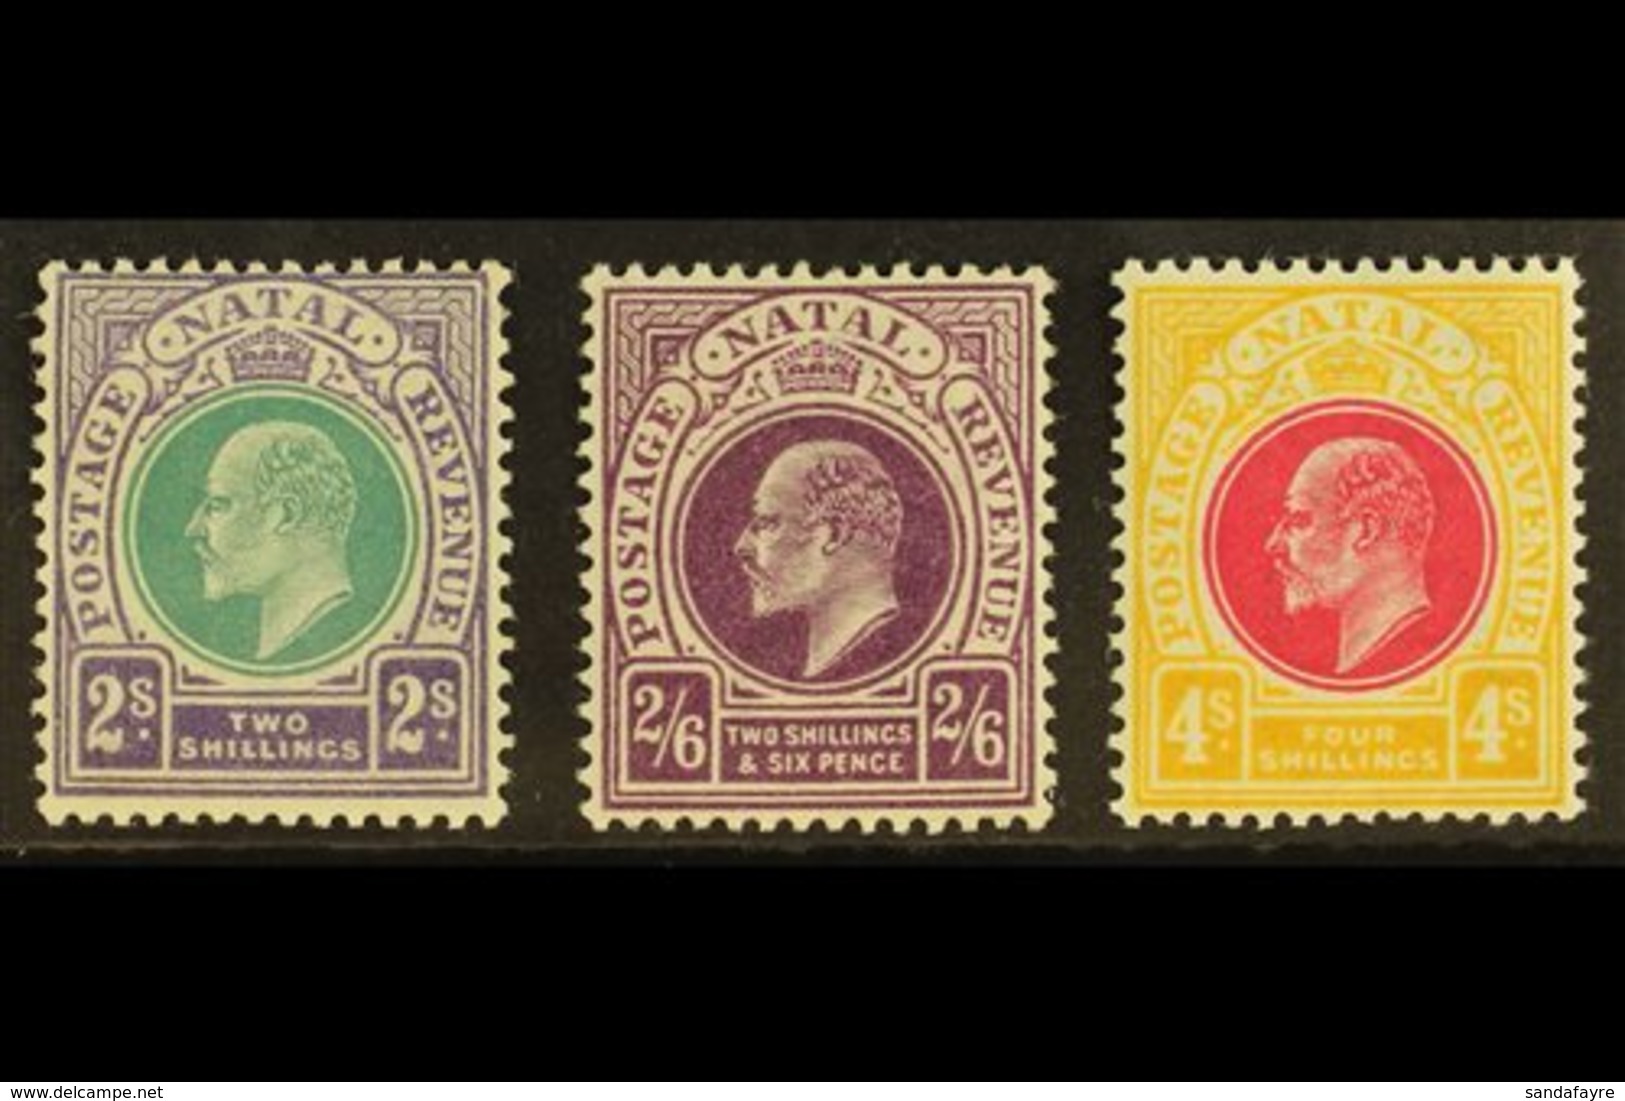 NATAL  1902 2s, 2s 6d & 4s Ed VII Top Values, SG 137/9, Very Fine And Fresh Mint. (3 Stamps) For More Images, Please Vis - Zonder Classificatie